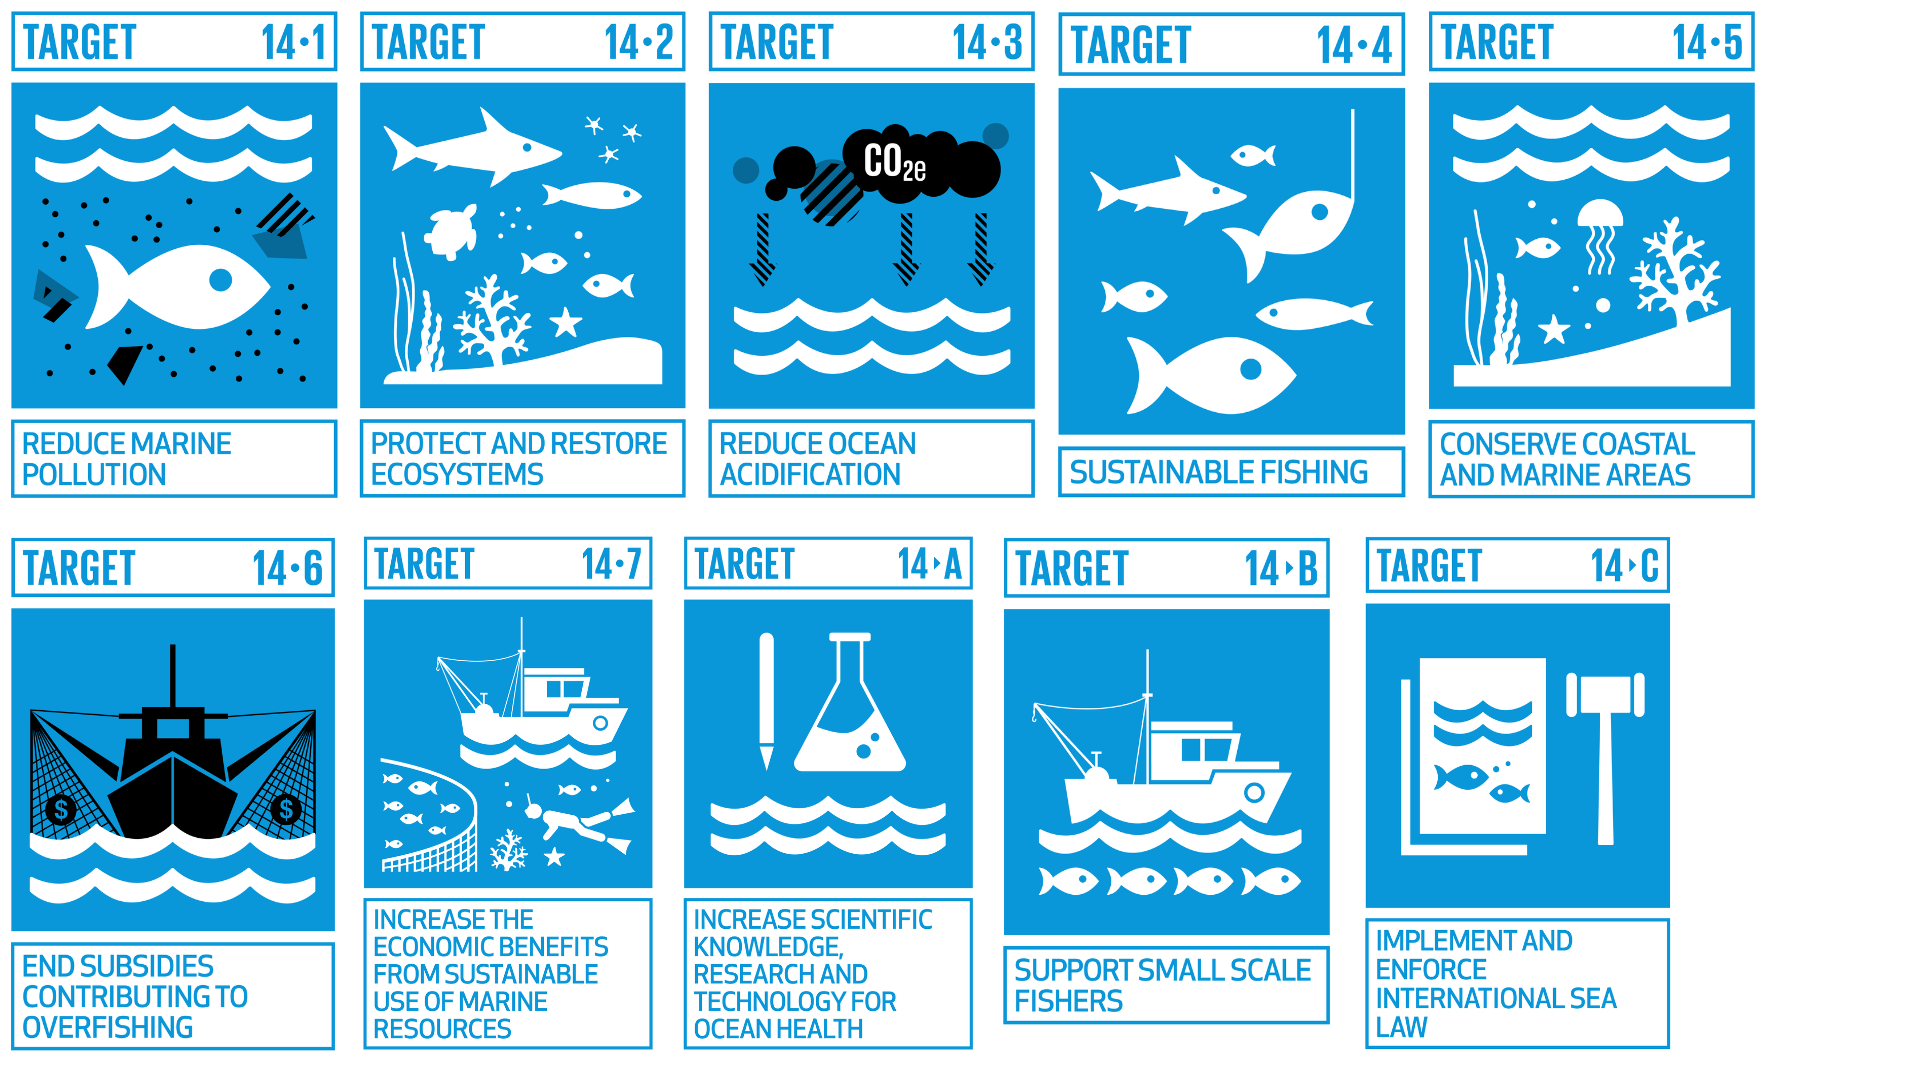 SDG 14 - Conserve and sustainably use the oceans, seas and marine resources for sustainable development — Thompson Okanagan Tourism Association (TOTA)